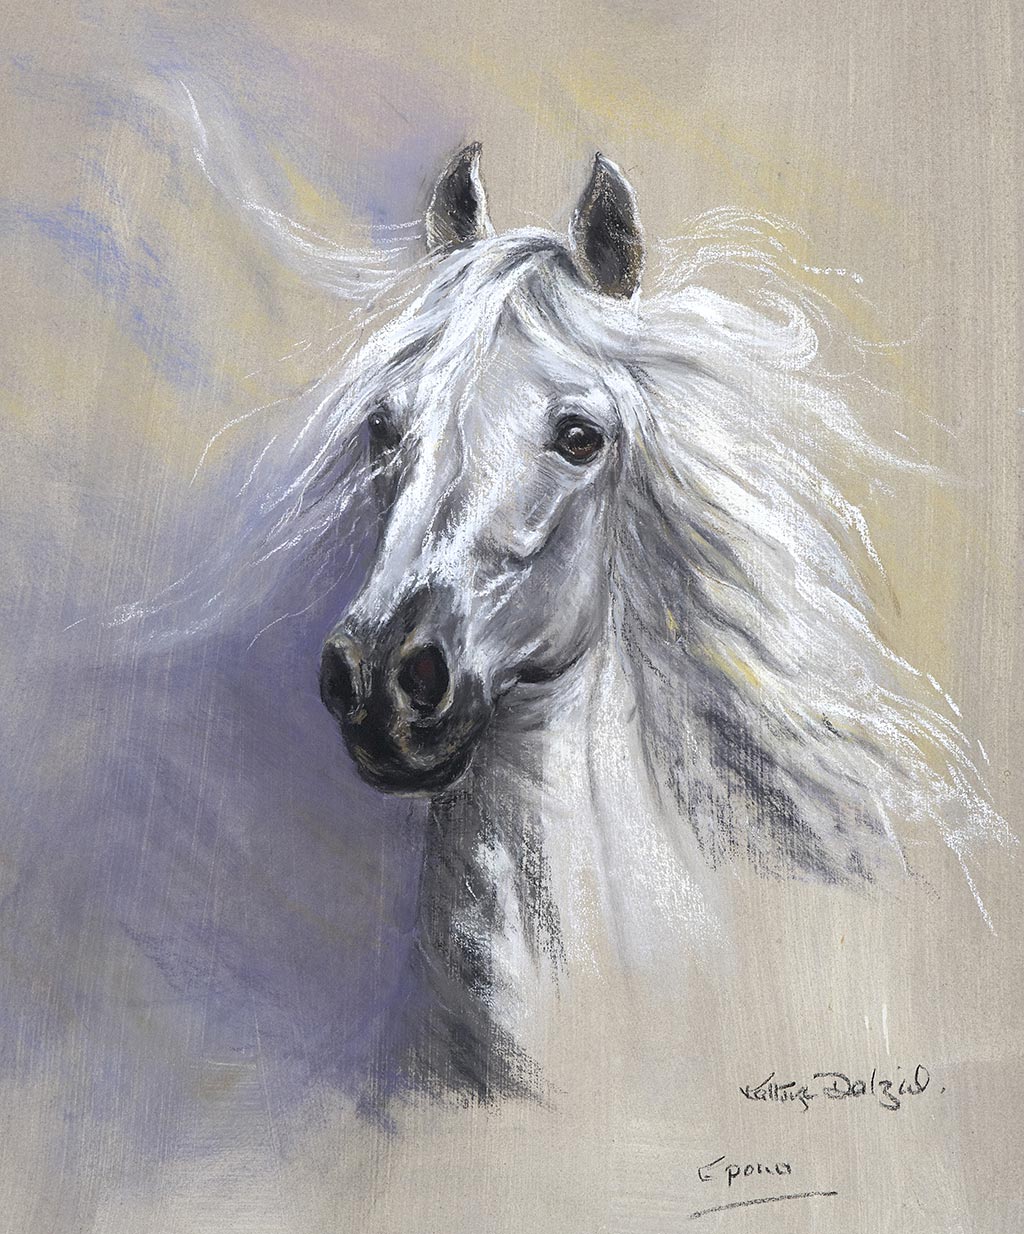 ‘Epona’ The silver horse